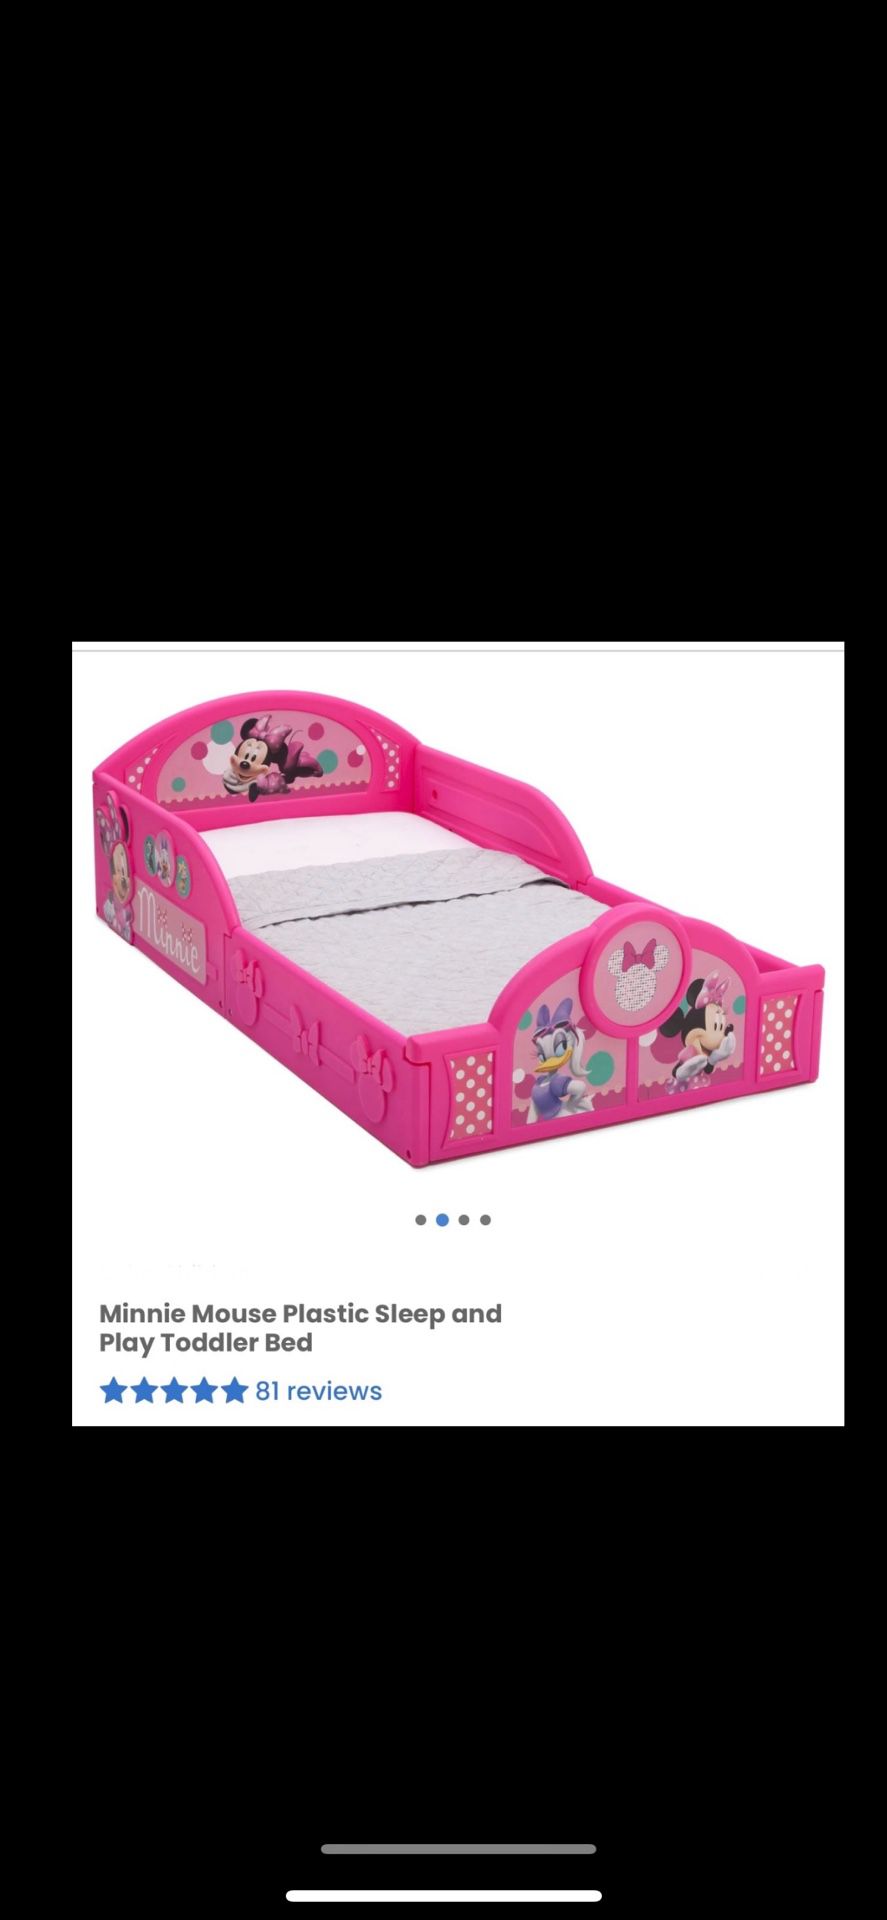 Minnie Mouse Plastic Toddler Bed Frame/ Bed/ Toddler/ Kids/ Toys/ Bedroom/ Sleep/ New